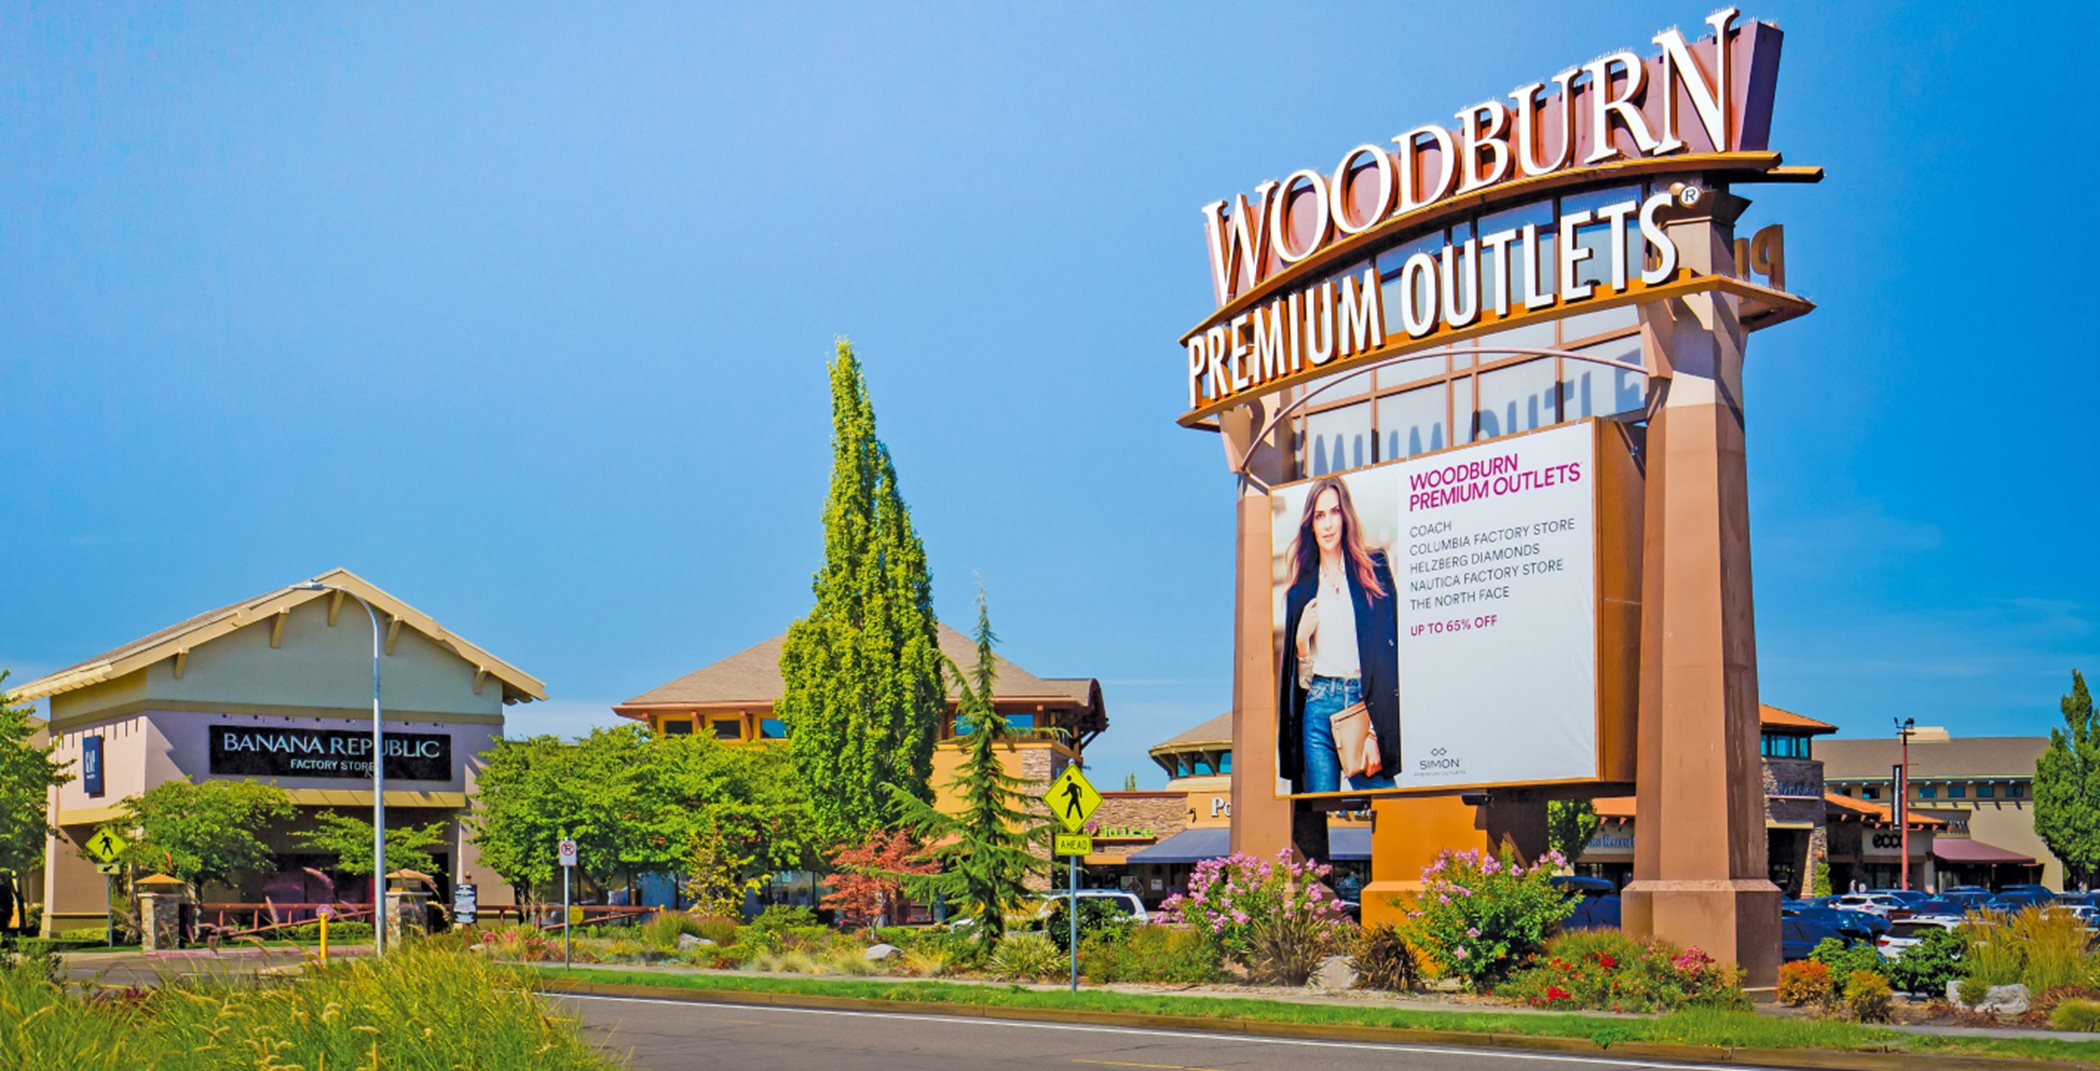 Woodburn Outlets